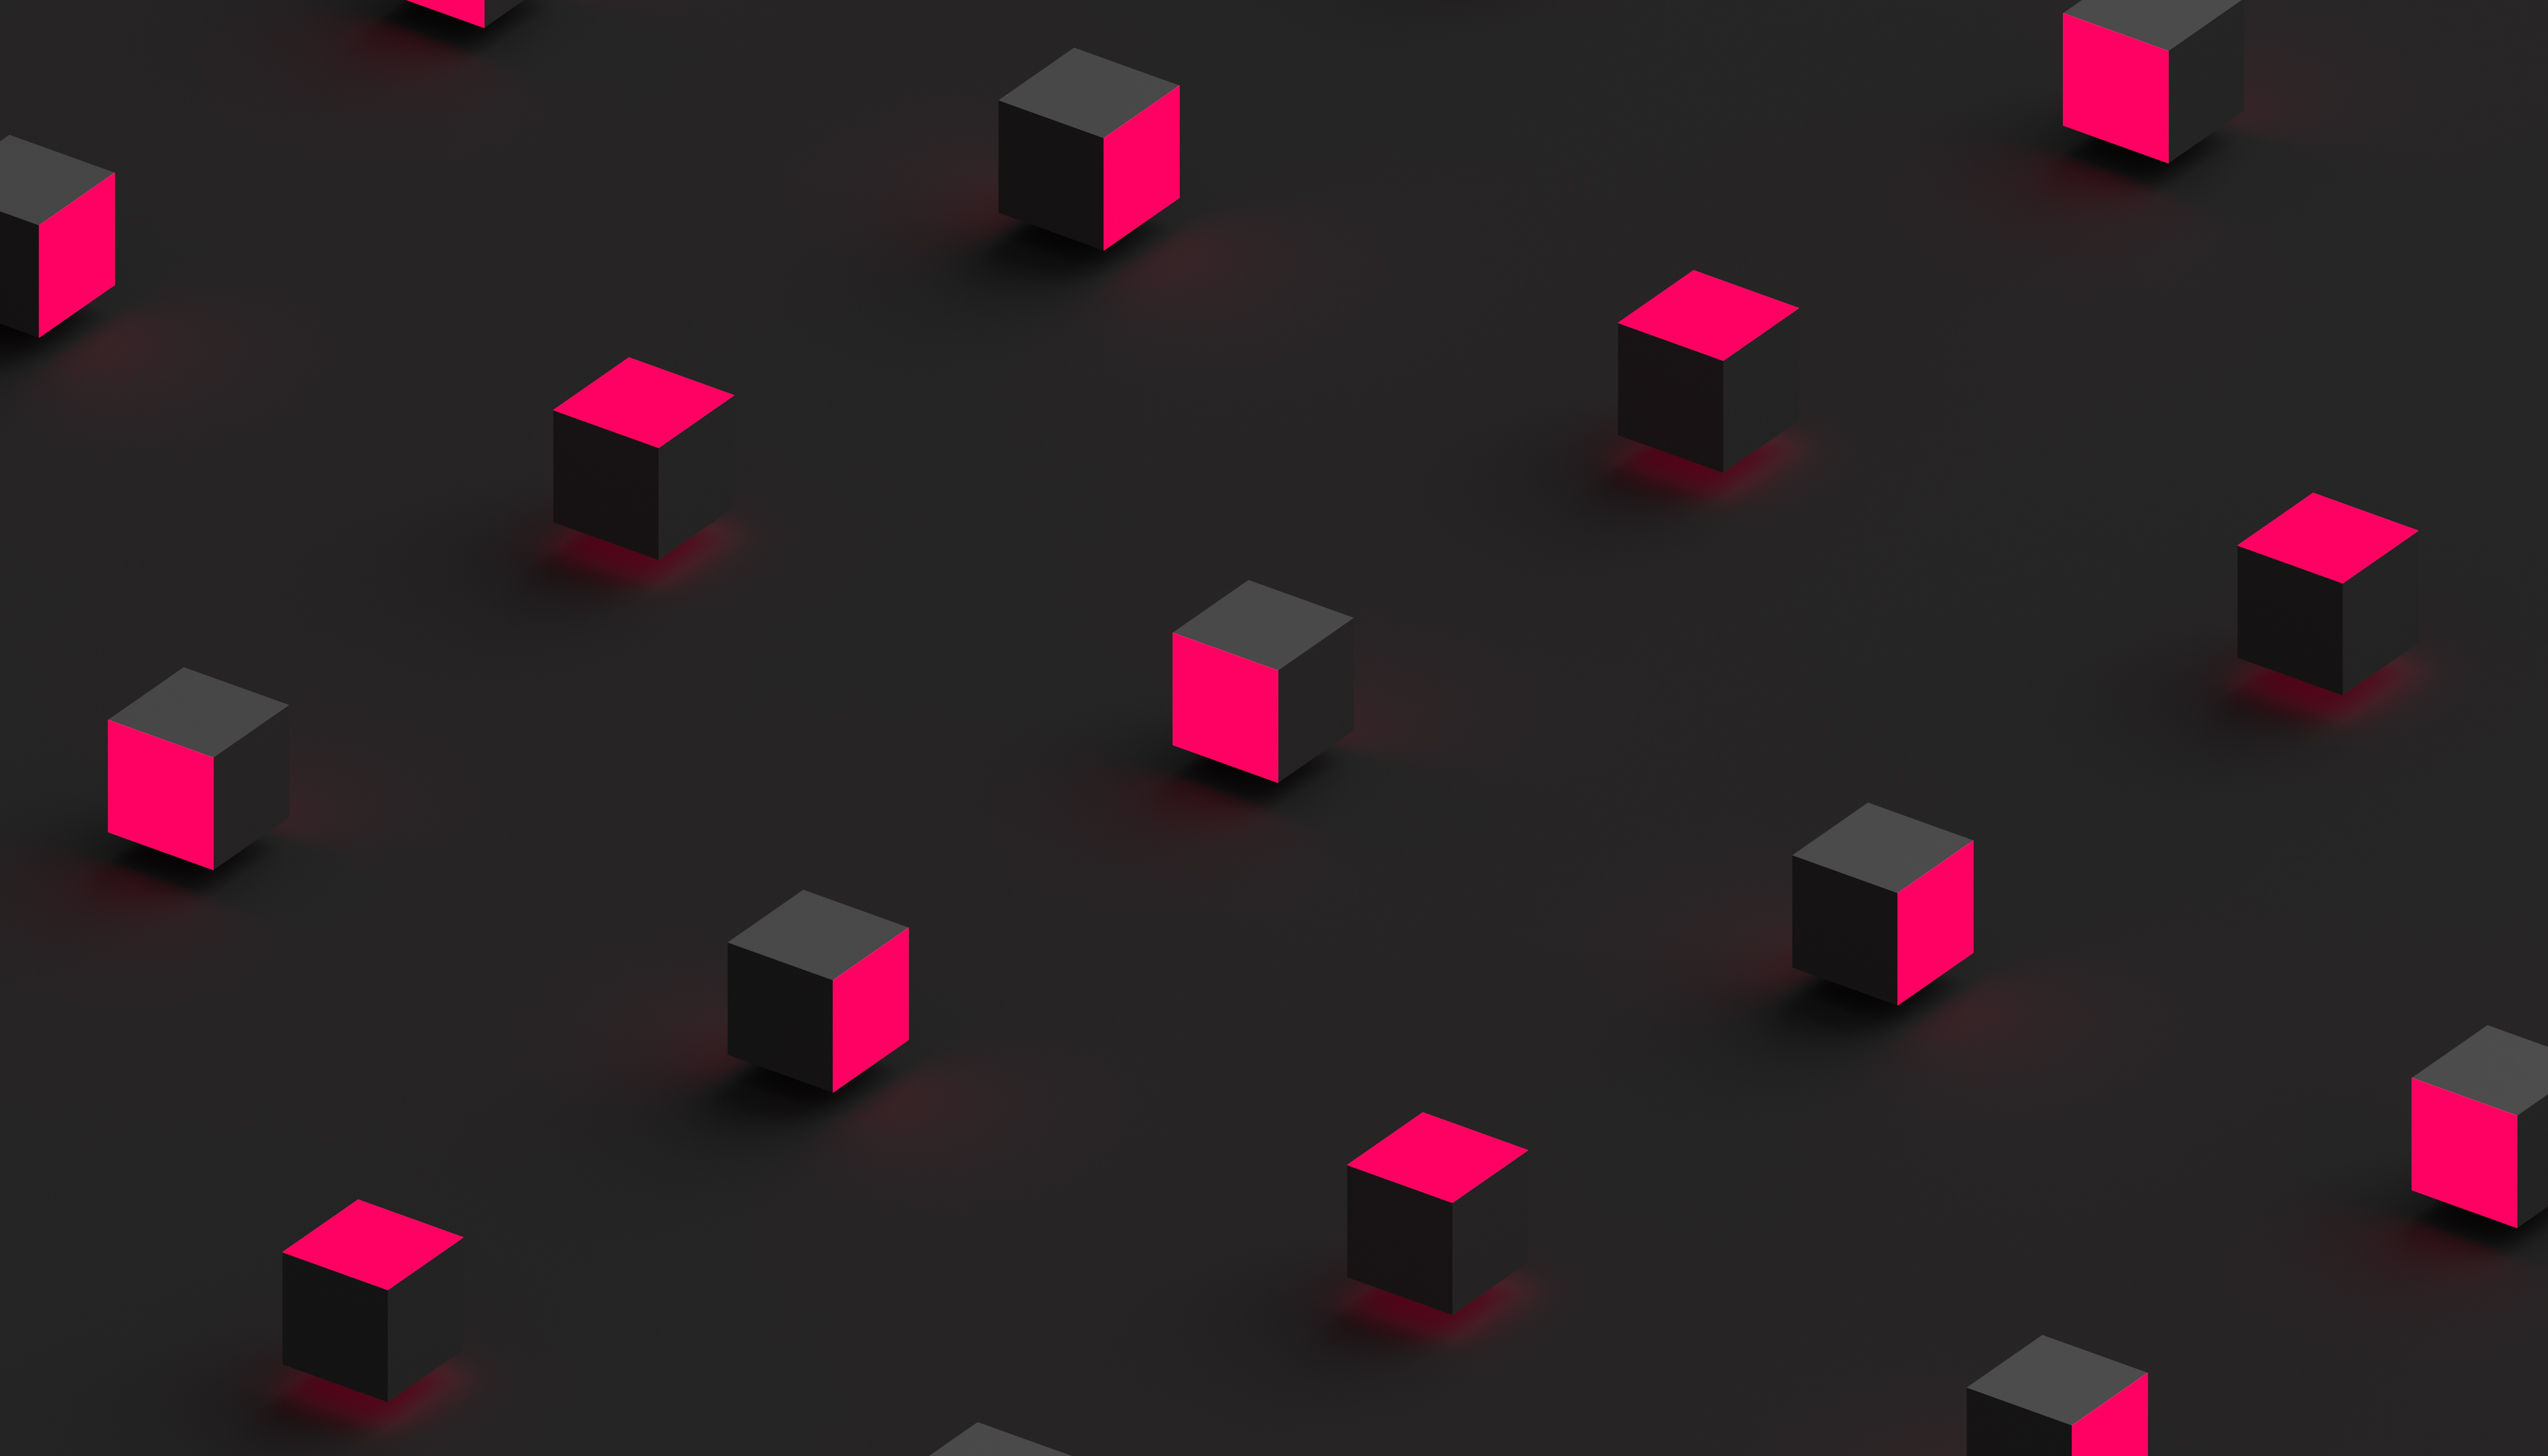 General 7000x4000 abstract 3D Abstract glowing shapes lights CGI minimalism dark 3D Blocks pink vector digital art simple background